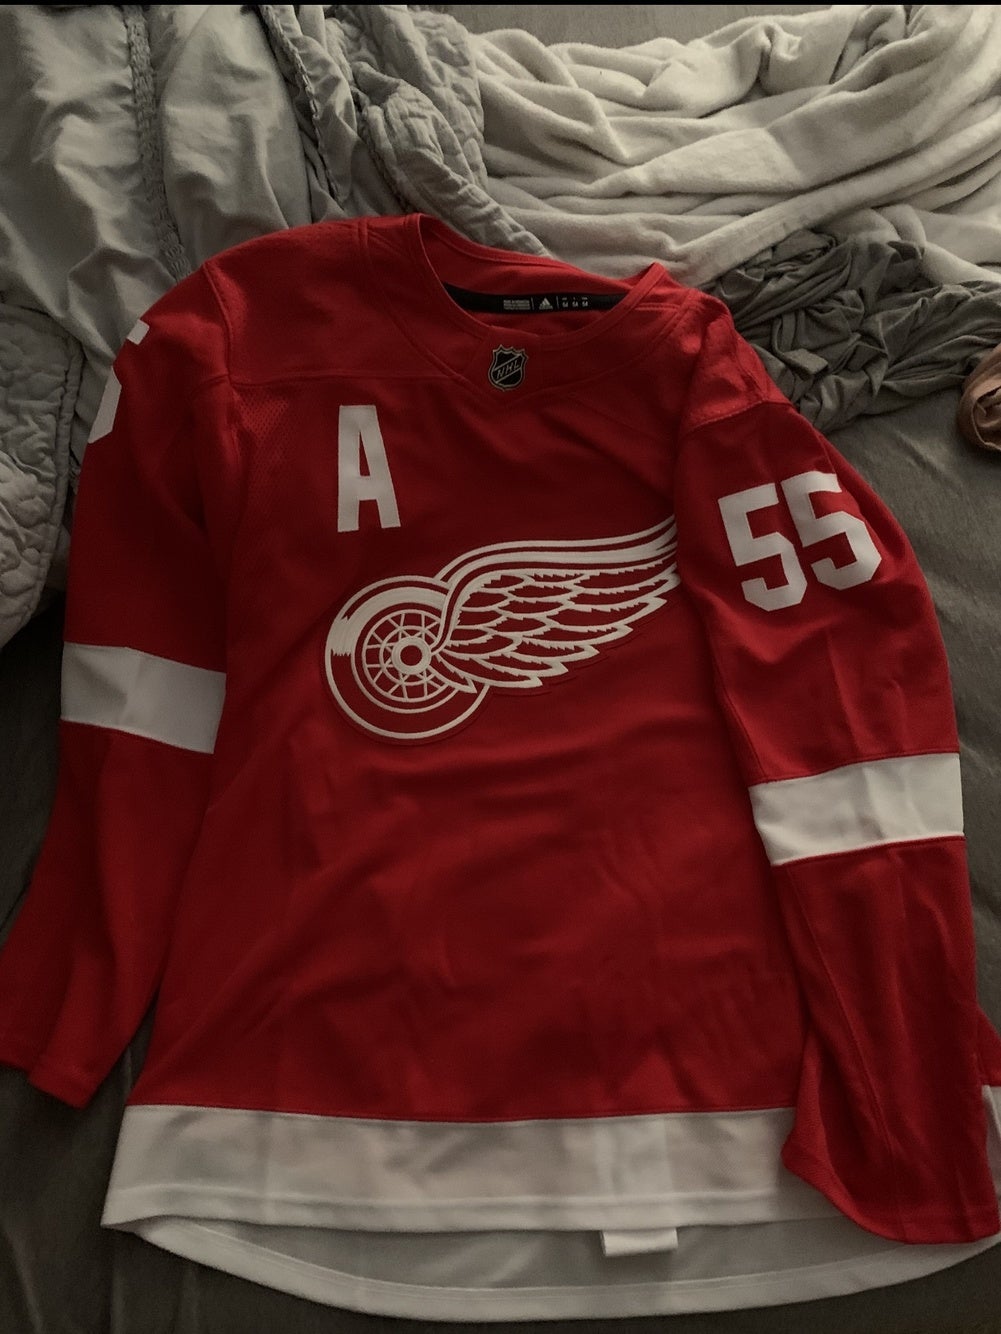 Darren McCarty Signed Red Wings Jersey Inscribed B**** A